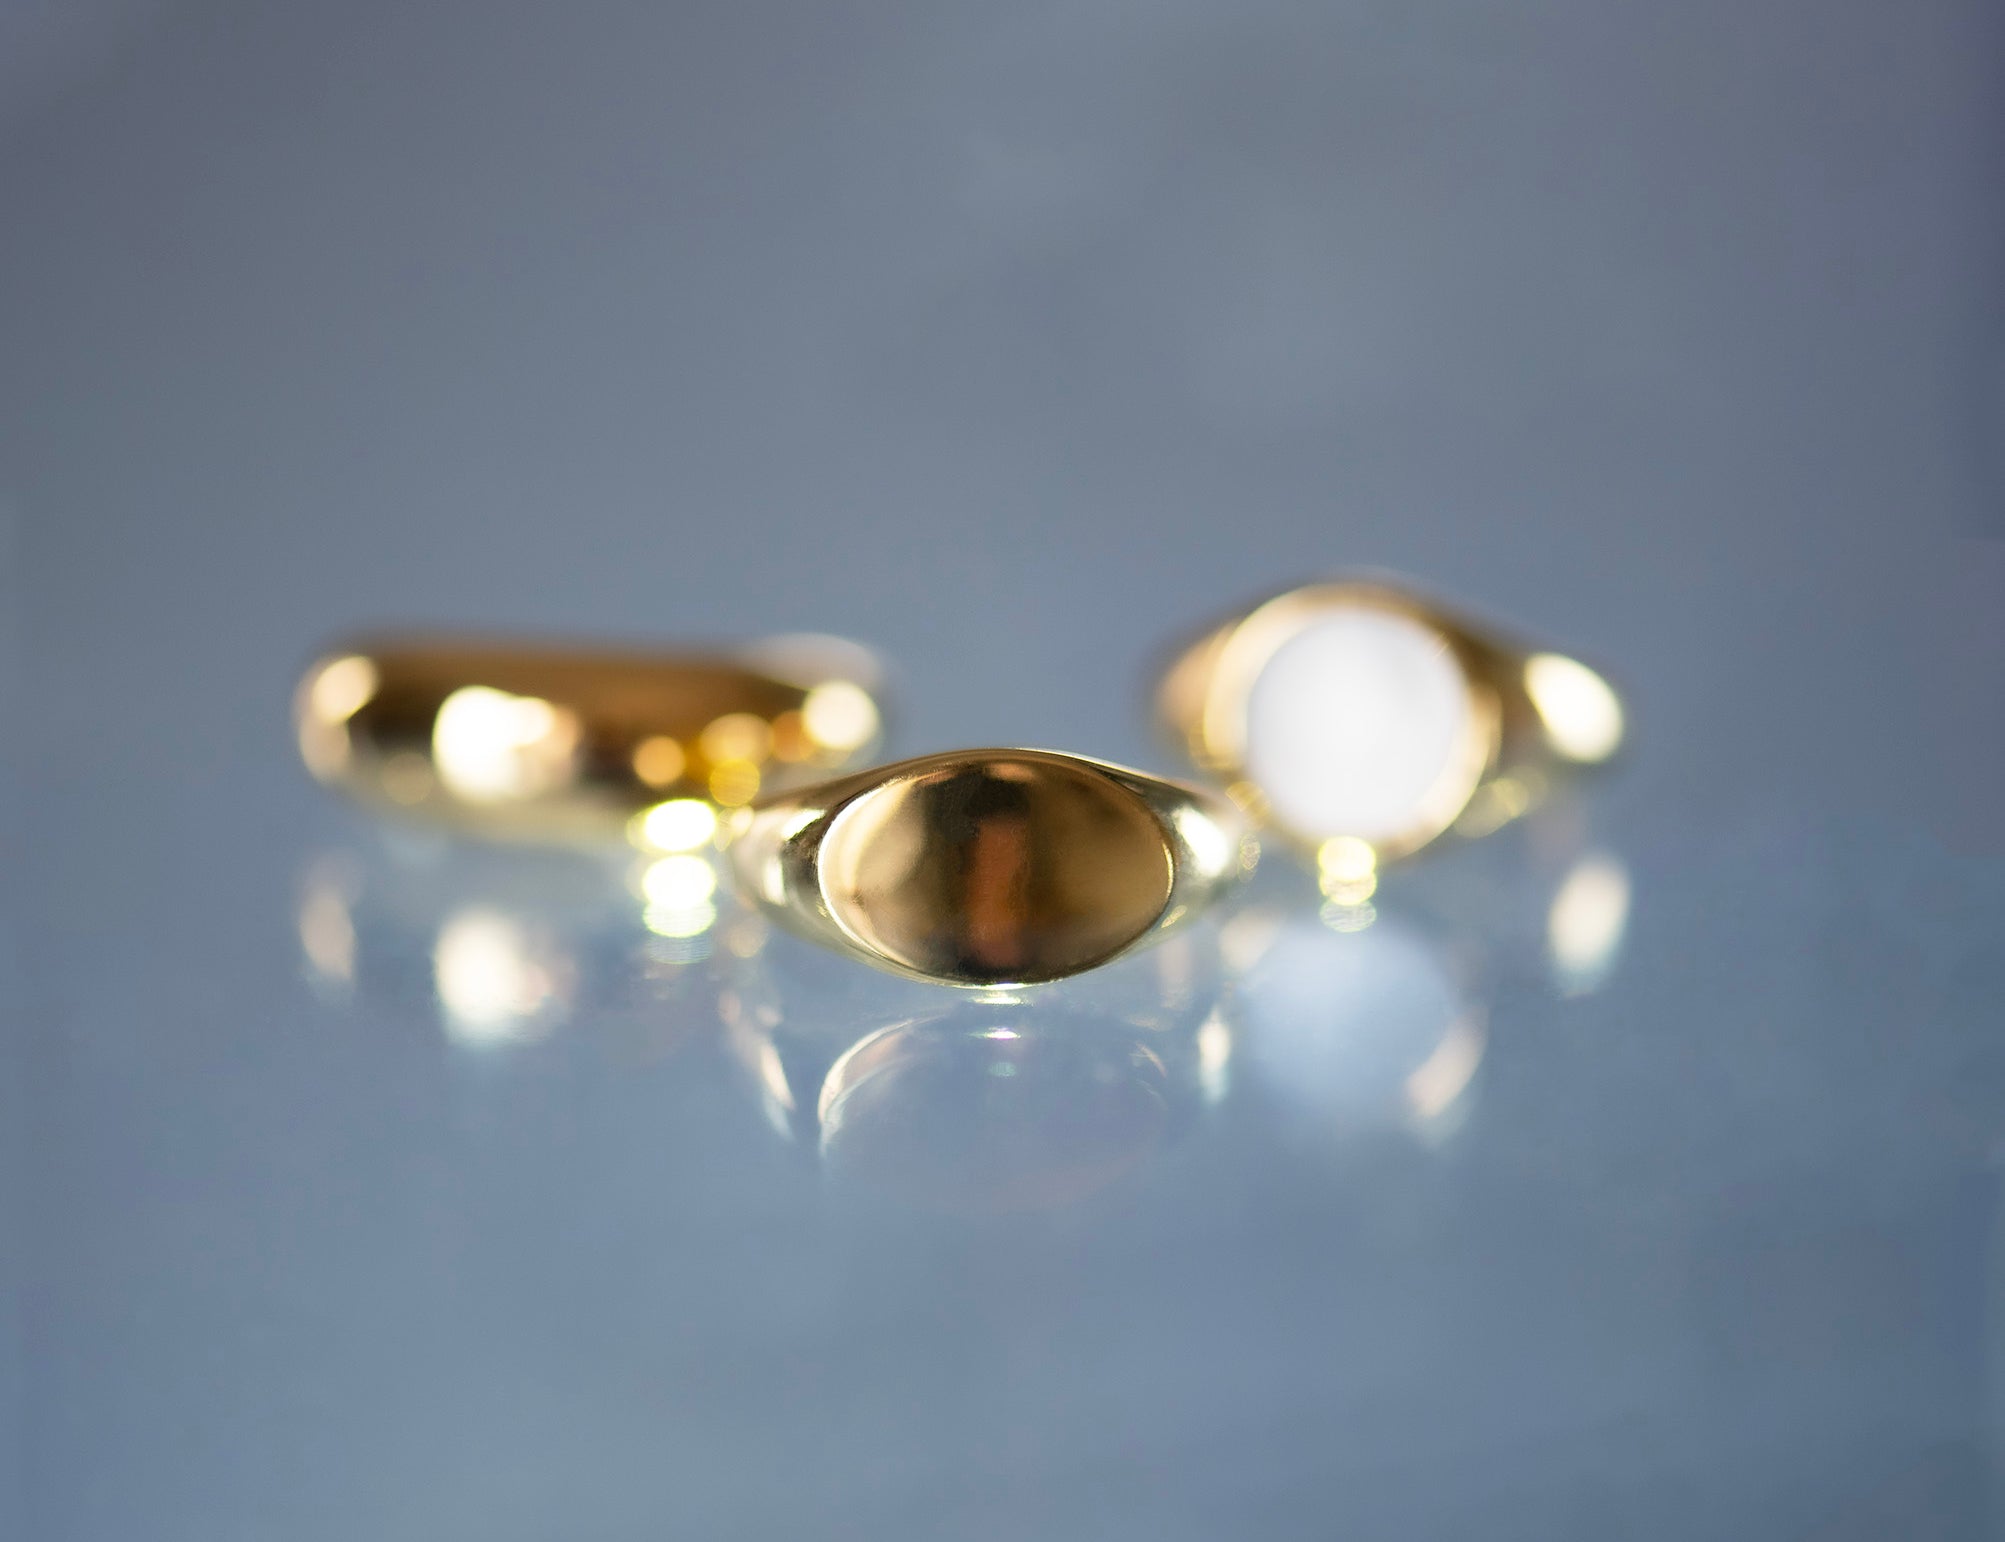 Artistic image of the Signature Signet Gold Ring with another two rings